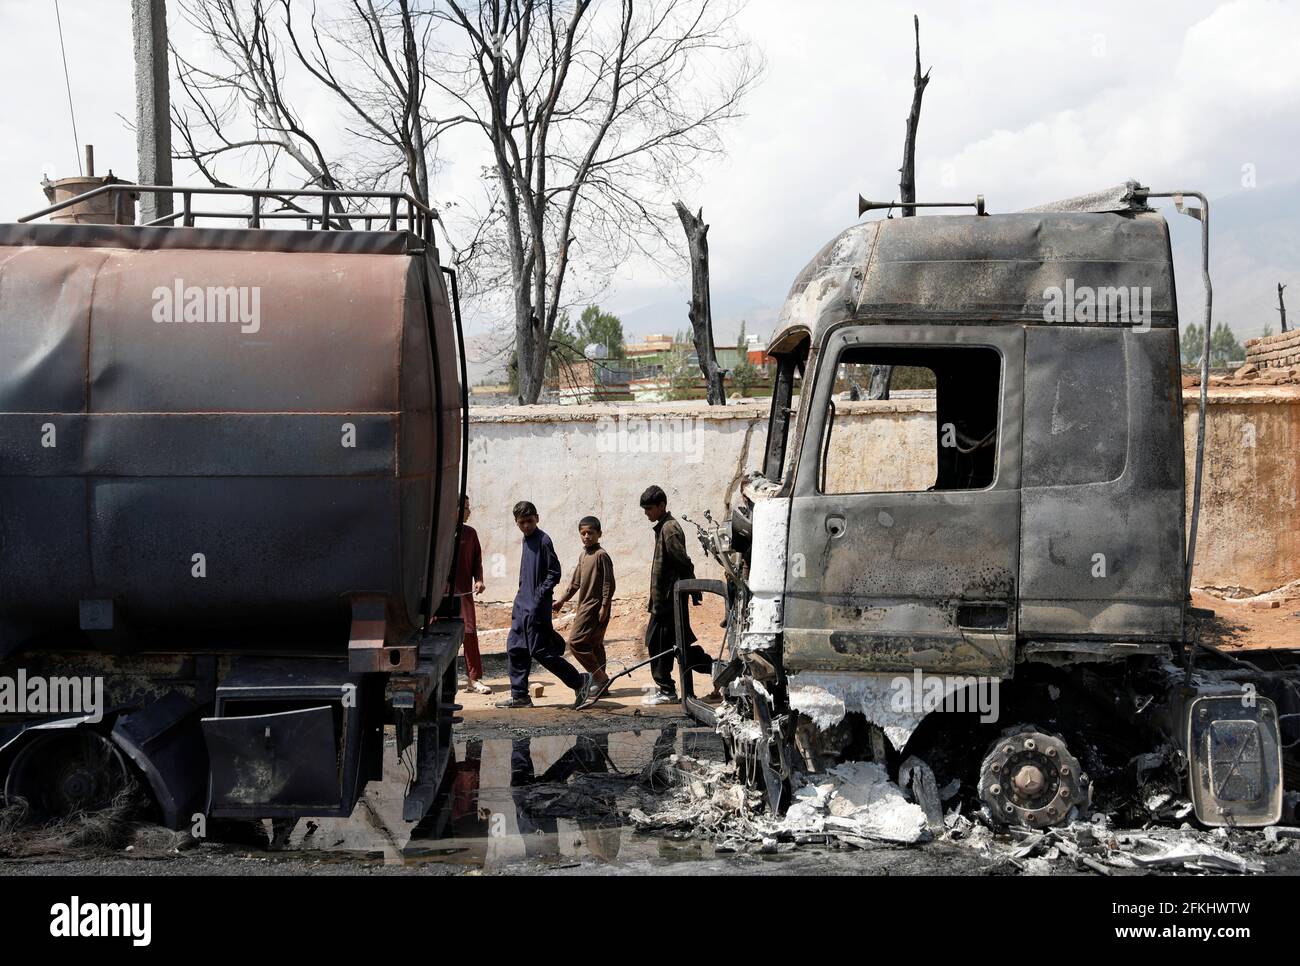 Boys walk past burnt fuel tankers after an overnight fire, on the outskirts of Kabul, Afghanistan May 2, 2021. REUTERS/Mohammad Ismail Stock Photo